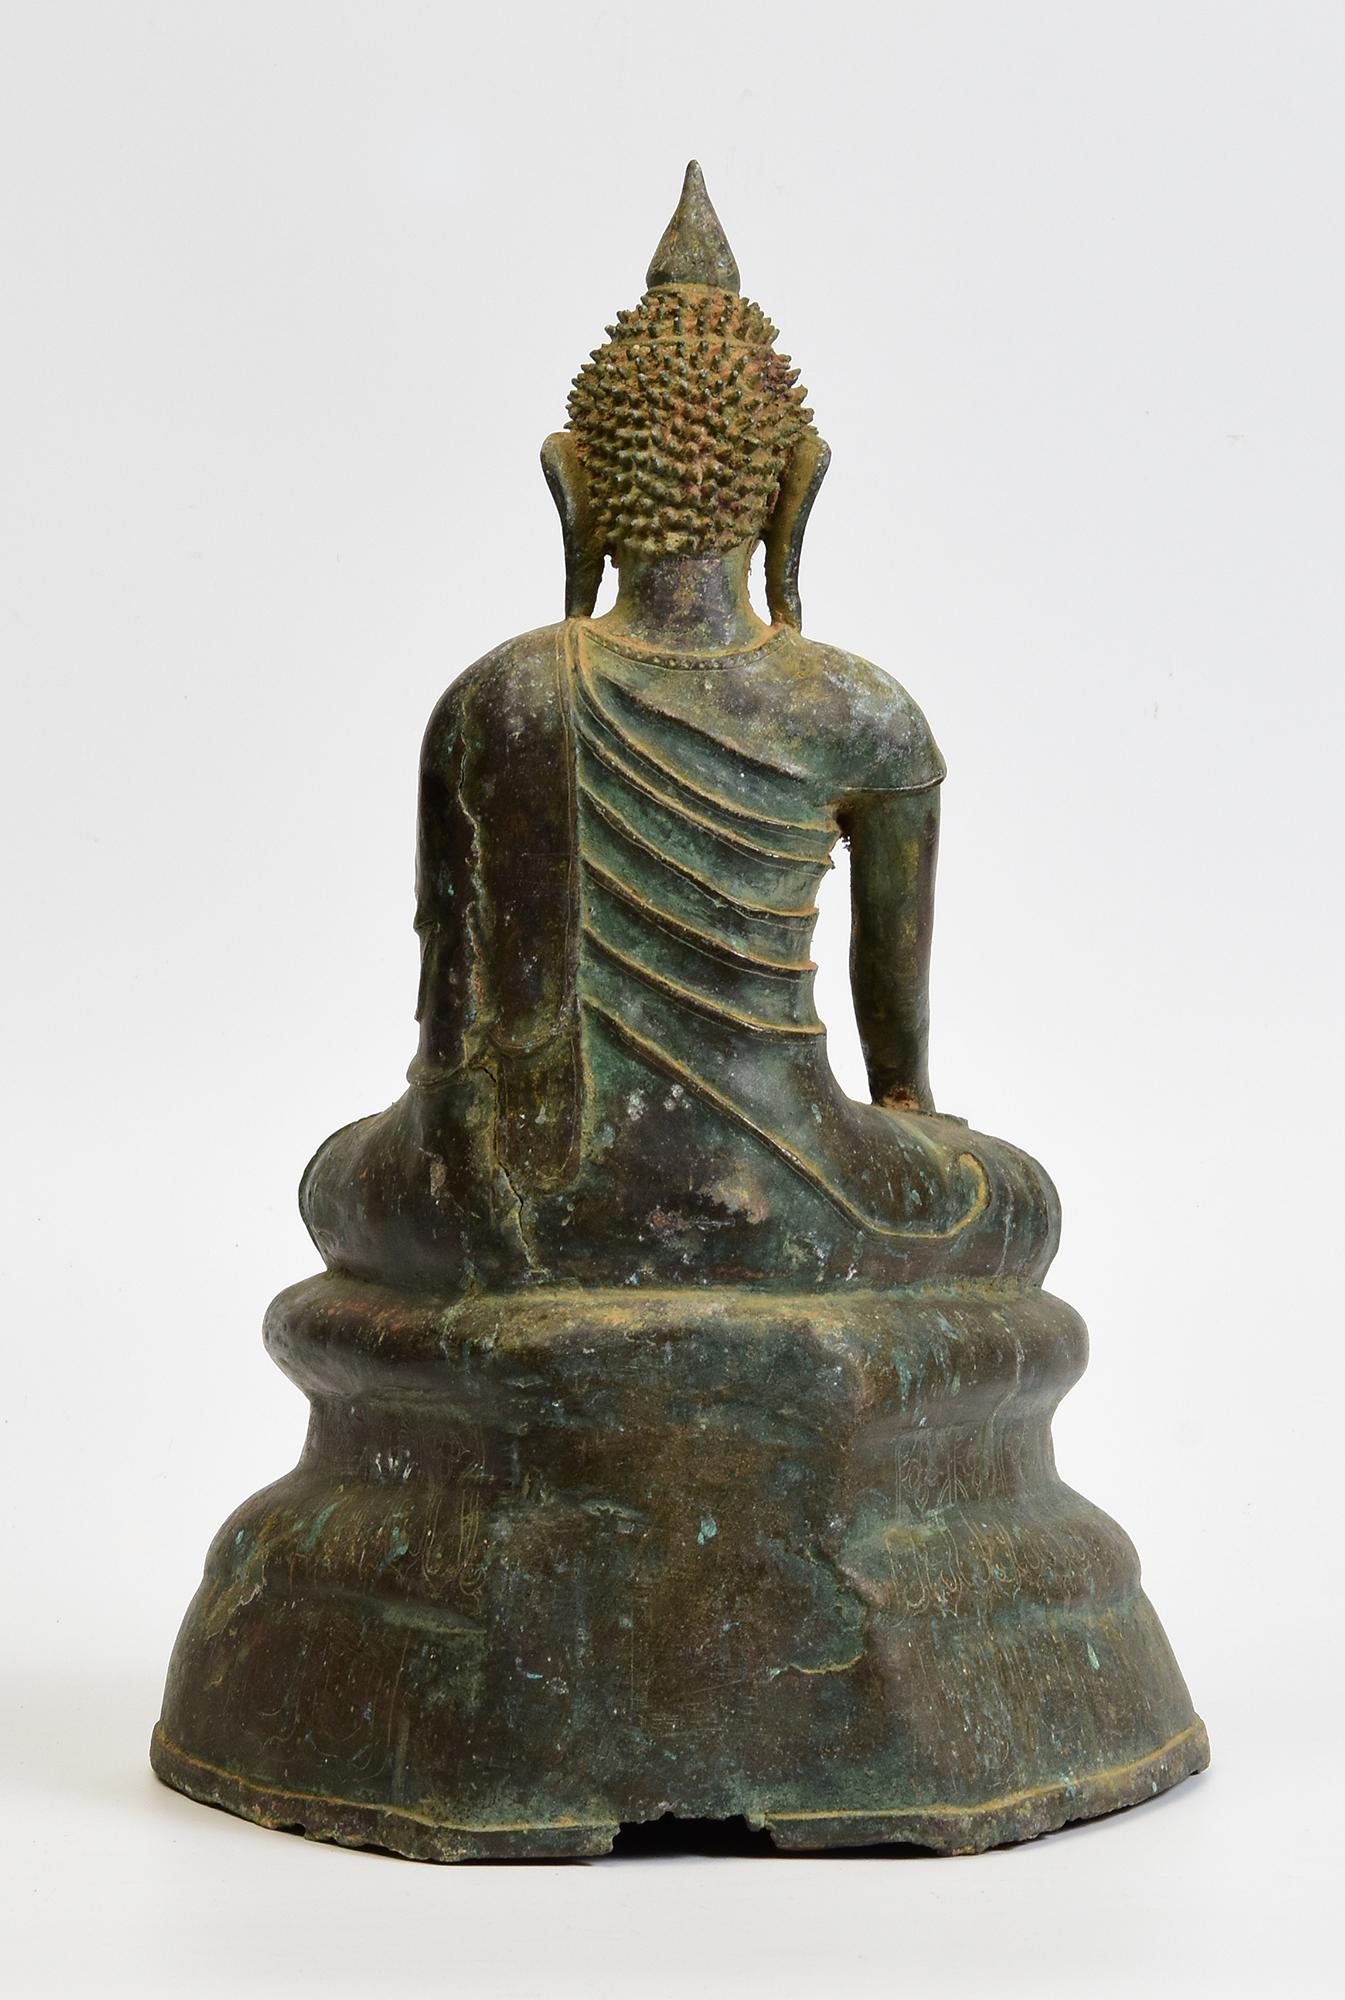 17th Century, Early Shan, Rare Antique Burmese Bronze Seated Buddha For Sale 3